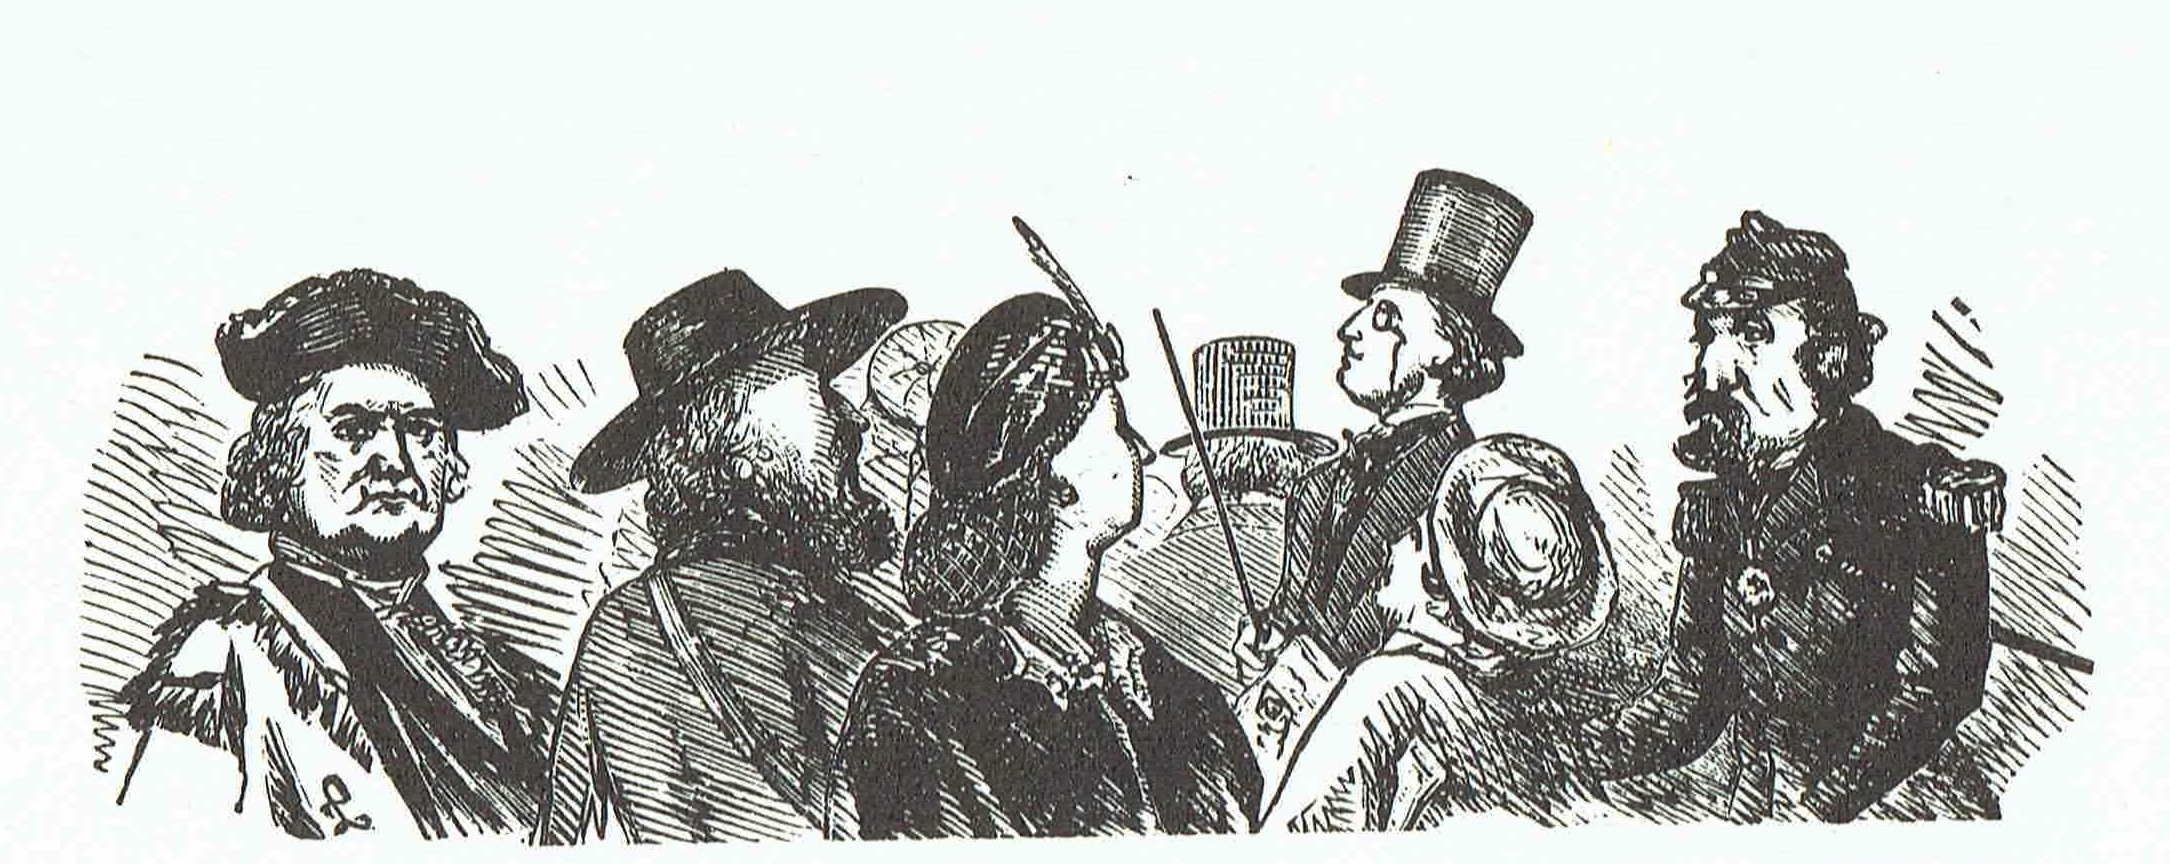    The Promenade  (1860s), artist unknown.  This group illustration shows Emperor Norton on the right. The appearance of Frederick Coombs, the self-styled George Washington II, on the left points to an 1860s date for the work, as Coombs was active in